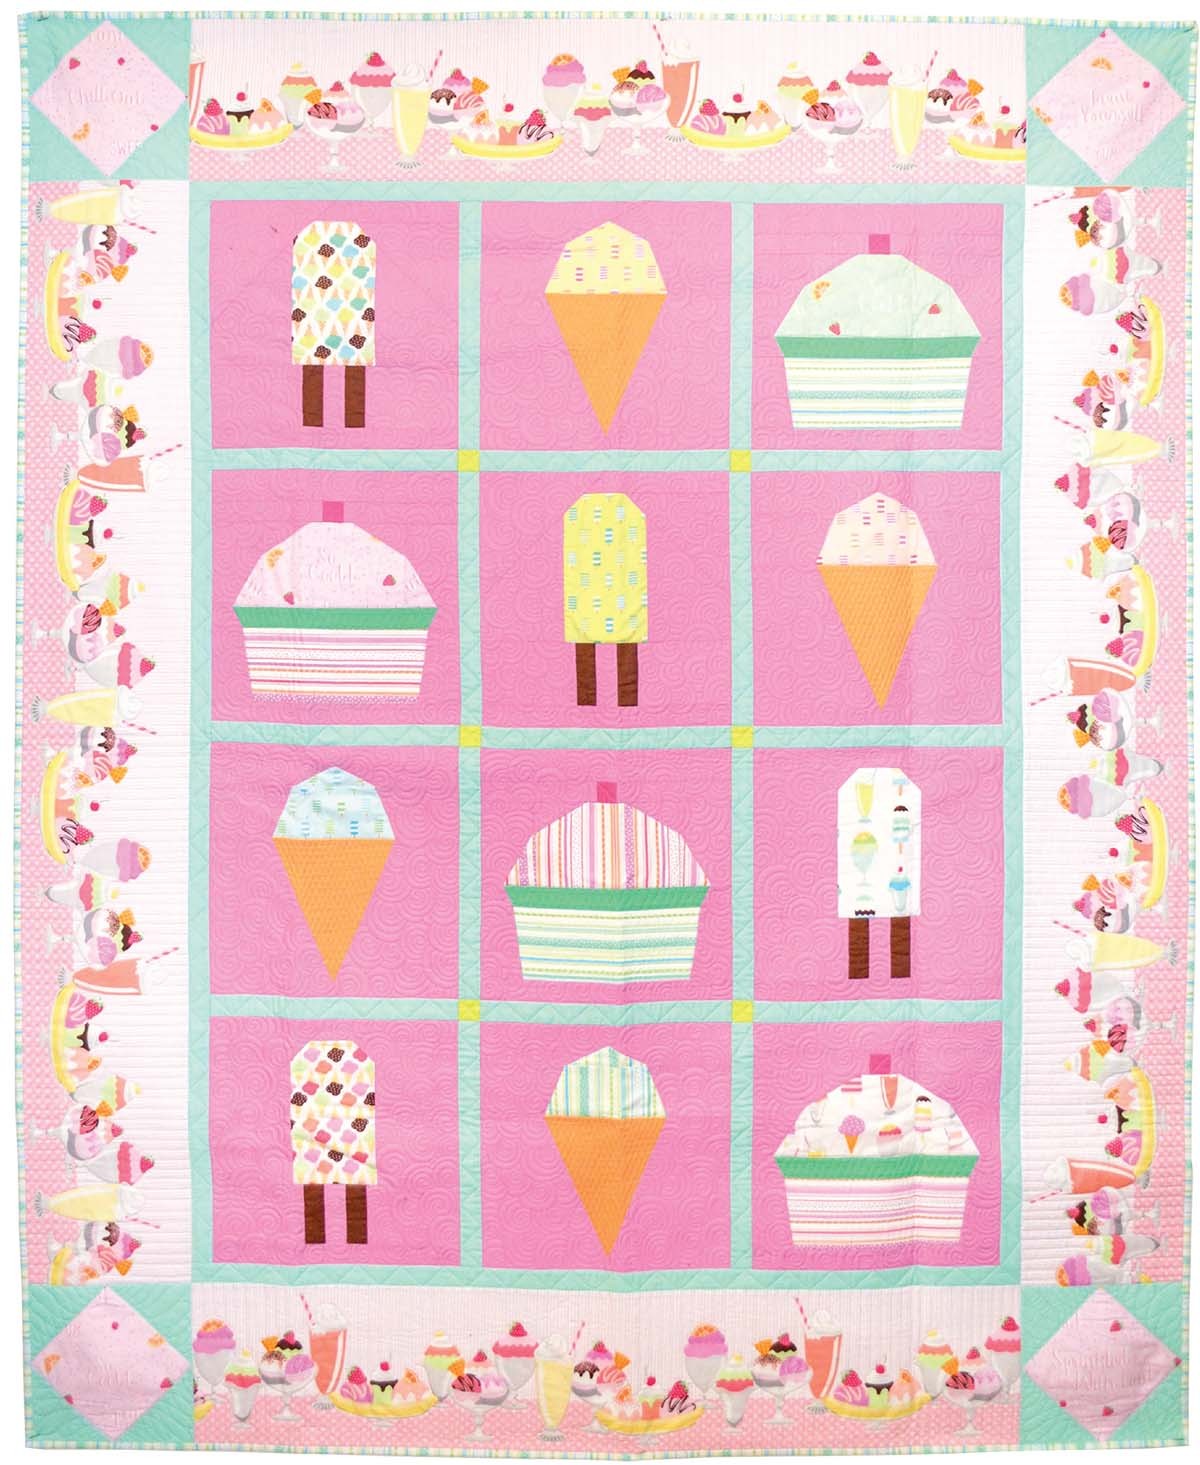 100% Cotton Sateen 30in x 24in Flange Sham Roostery Pillow Sham Sprinkles Ice Cream On Pink Scatter Donut Cupcake Cupcakes Geometric Print